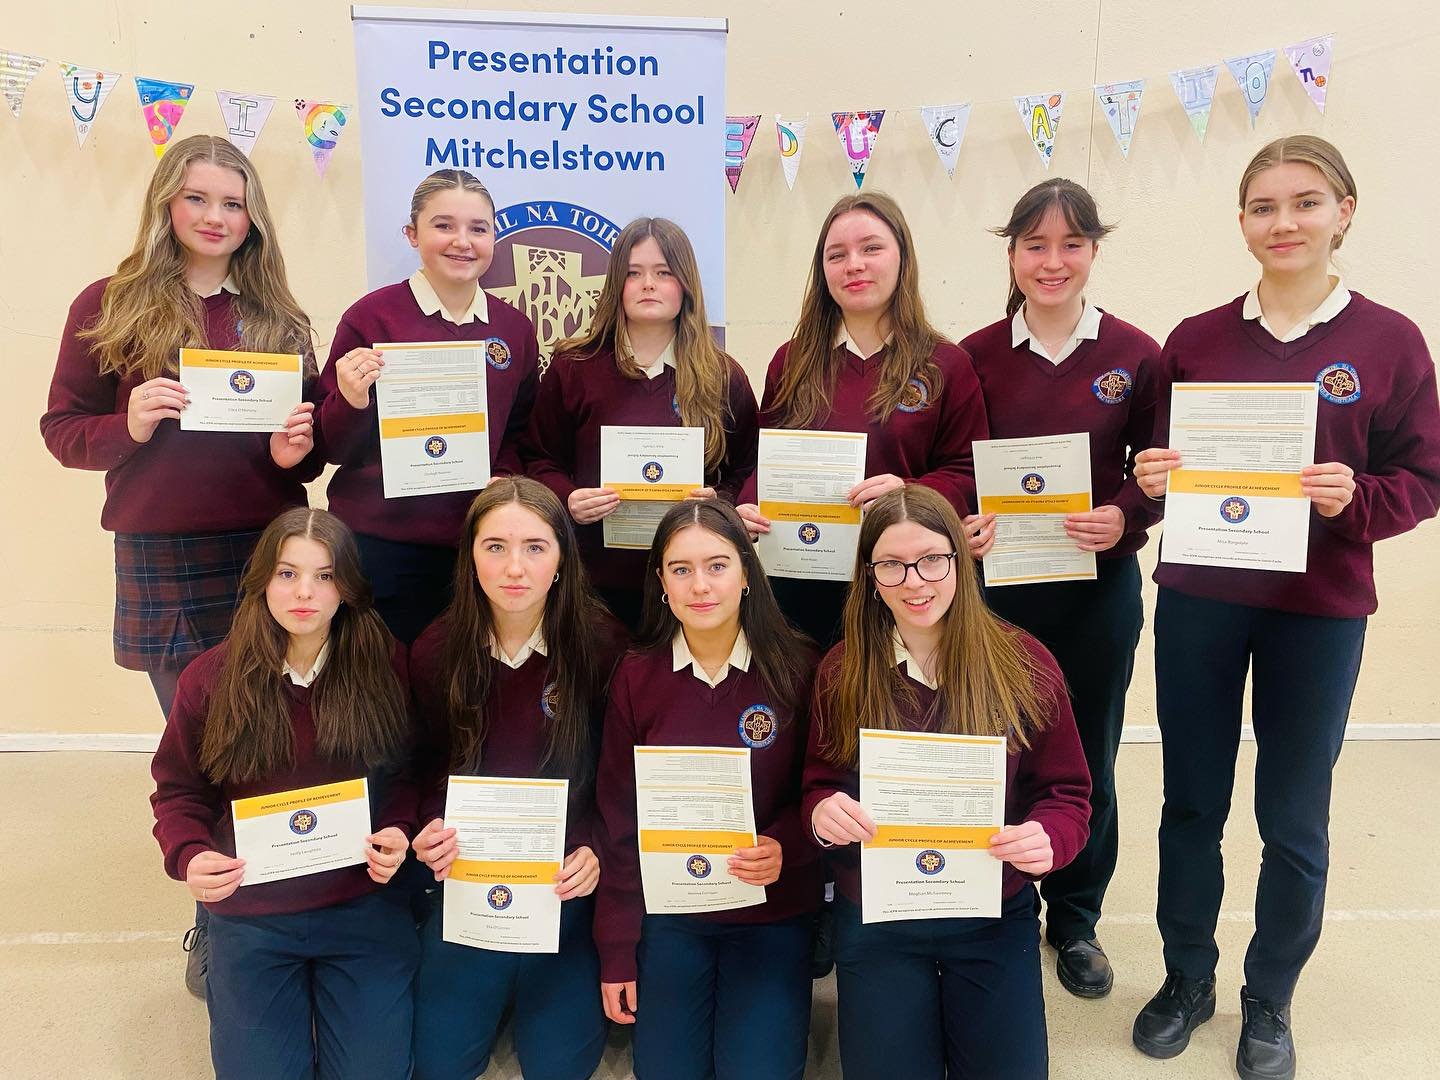 📜JCPA CERTS 📜Today our 3rd years 2023 received their Junior Cycle Profile of Achievement Certificates. This includes not only their Junior cycle results, but also their CBA results and &lsquo;other areas of learning&rsquo; from their three year jun